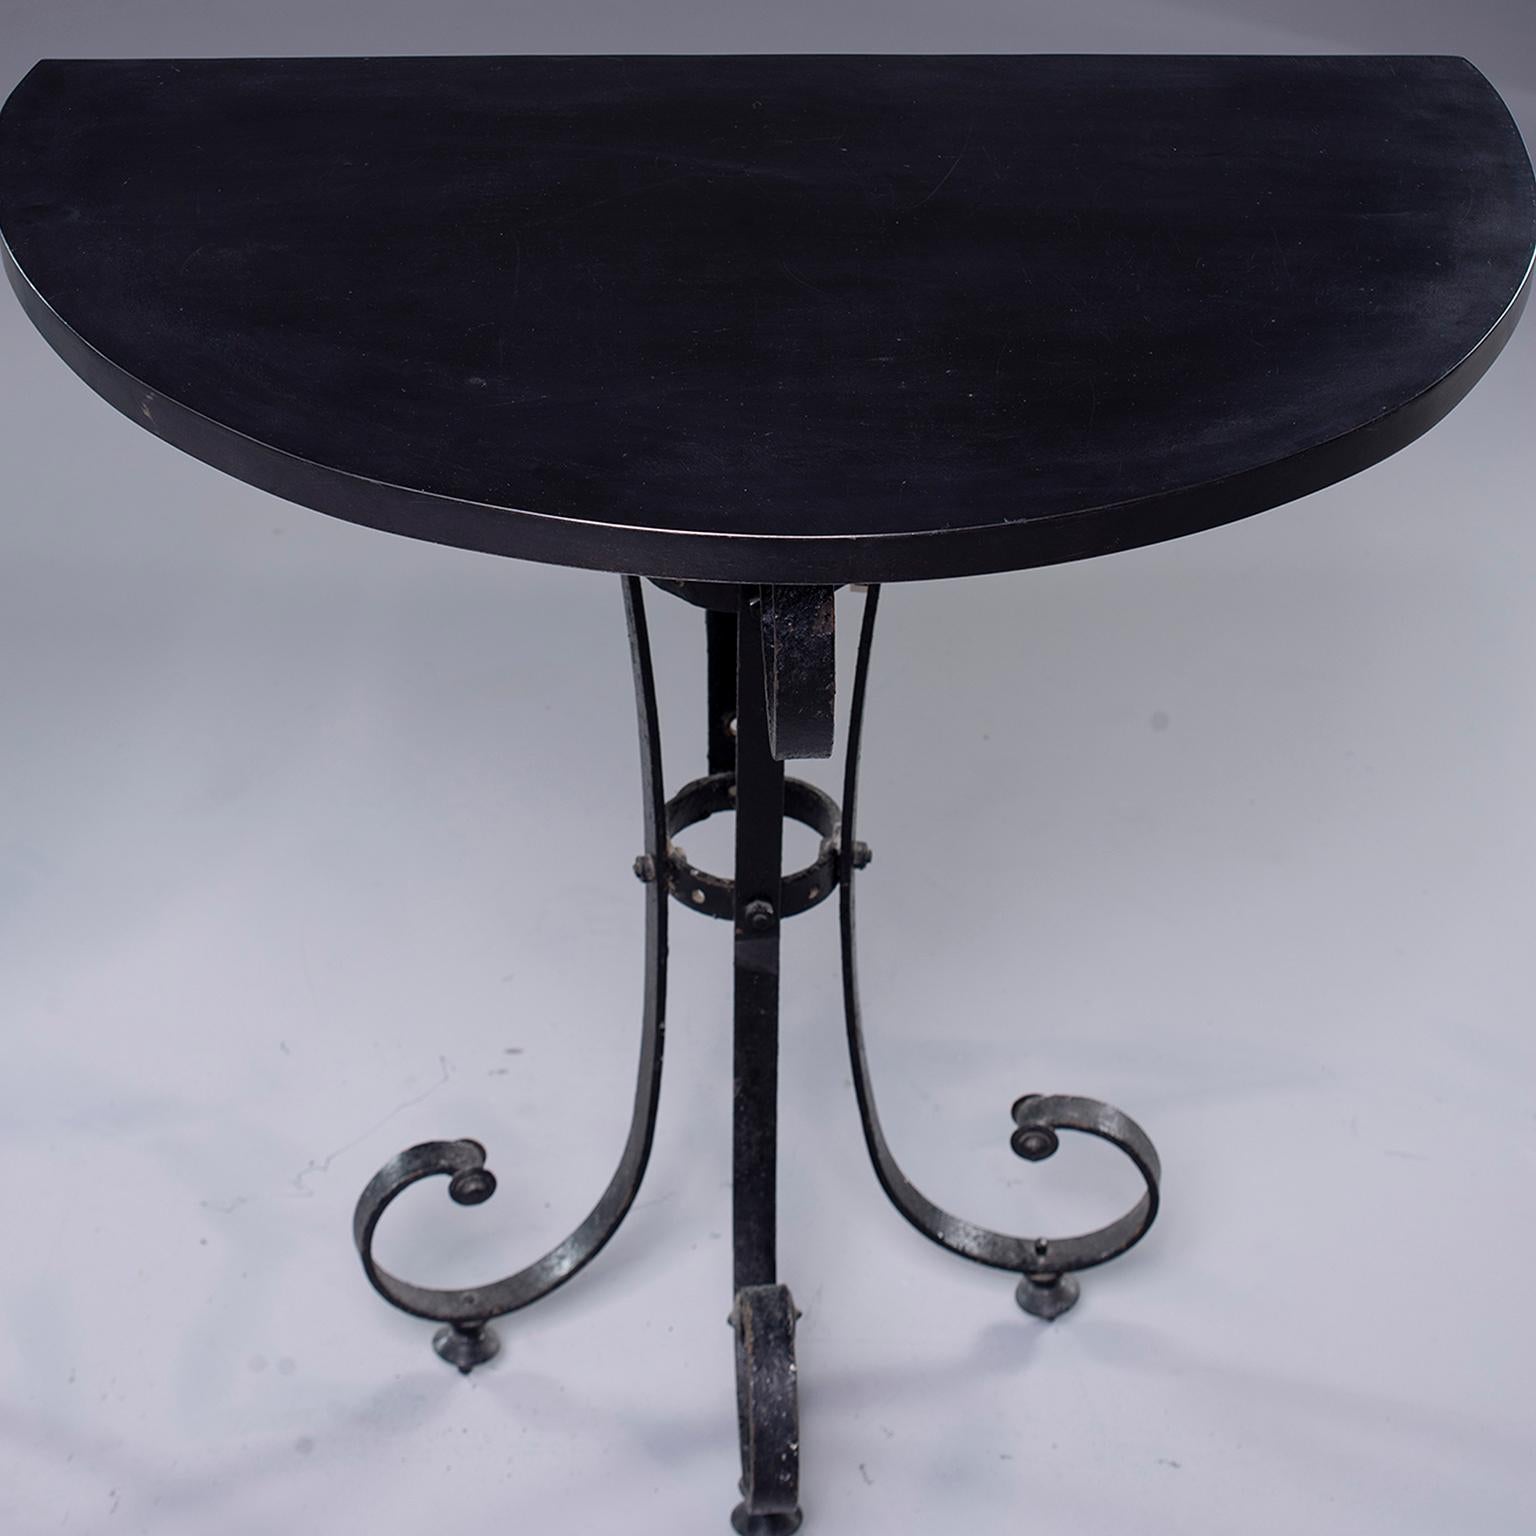 Pair of Demilune Consoles with Italian Iron Candelabra Base and Black Metal Tops 1